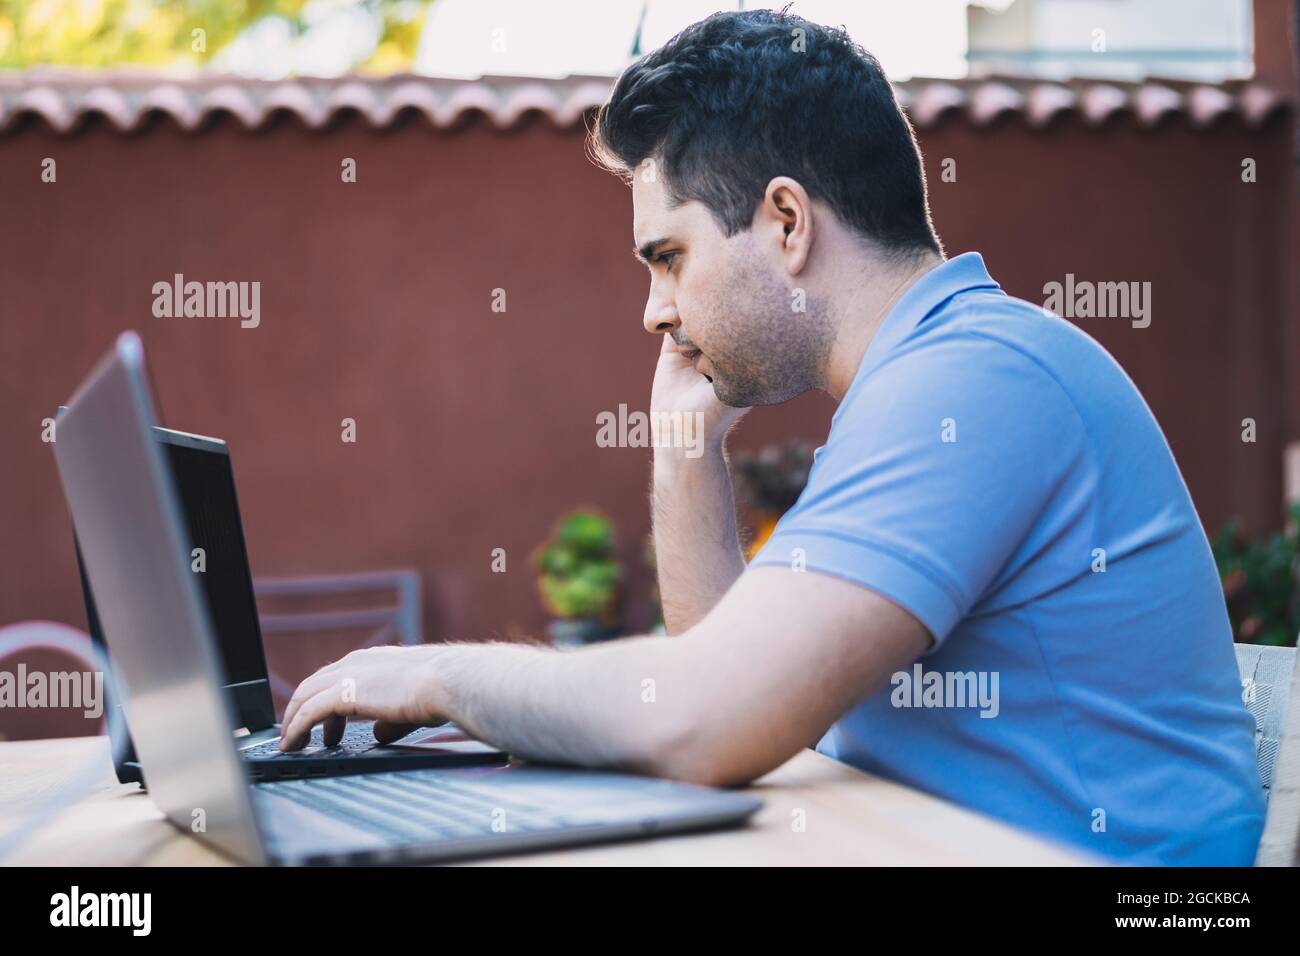 Profile of a young Caucasian man calling on a mobile phone while using a mobile phone holder to trade cryptocurrencies. Stock Photo